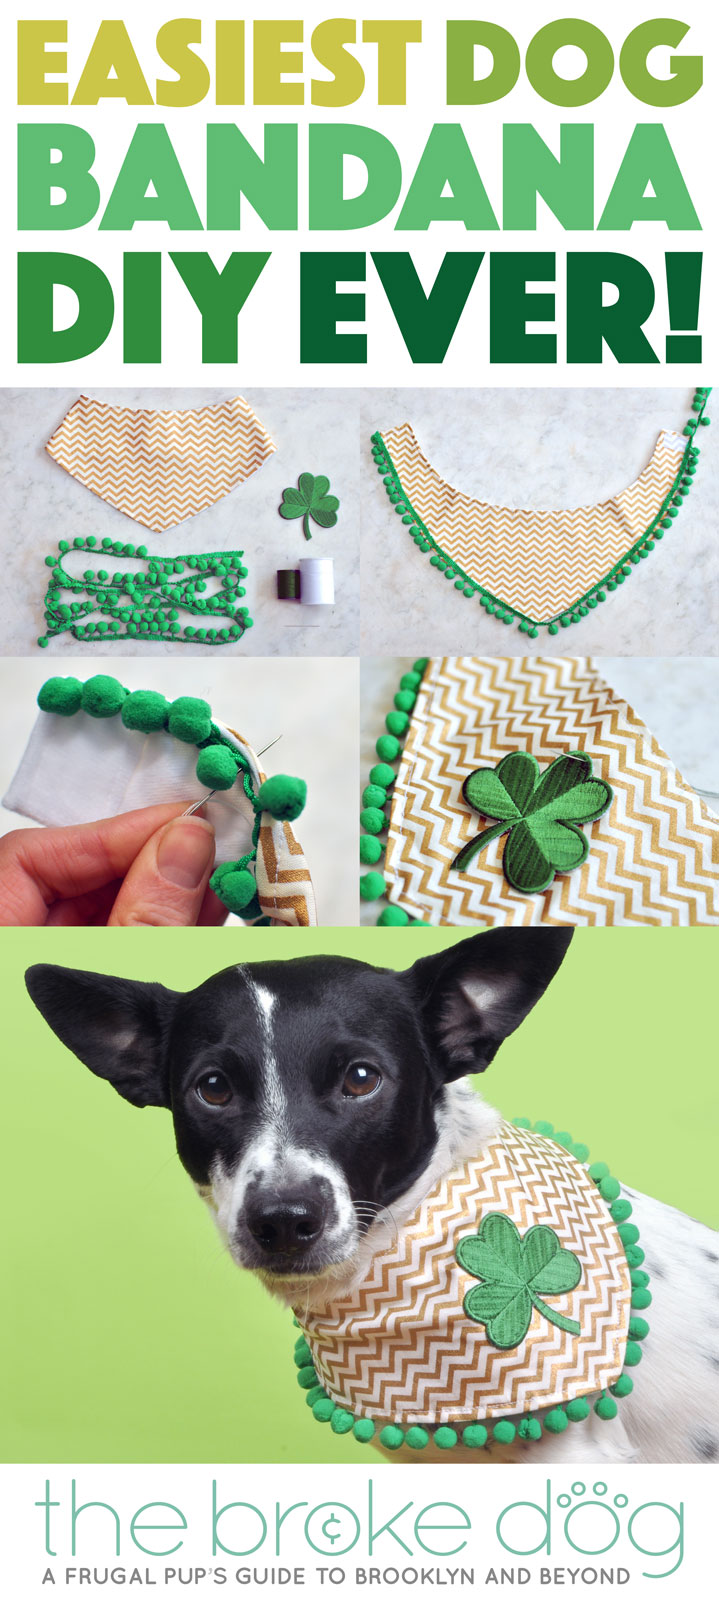 This dog bandana may look fancy, but I promise you that this DIY tutorial is probably the easiest dog bandana DIY you'll find! You don't even have to sew if you don't want to! All you need is a few simple materials and a little creativity to make your pup stand out at any event or for any holiday.